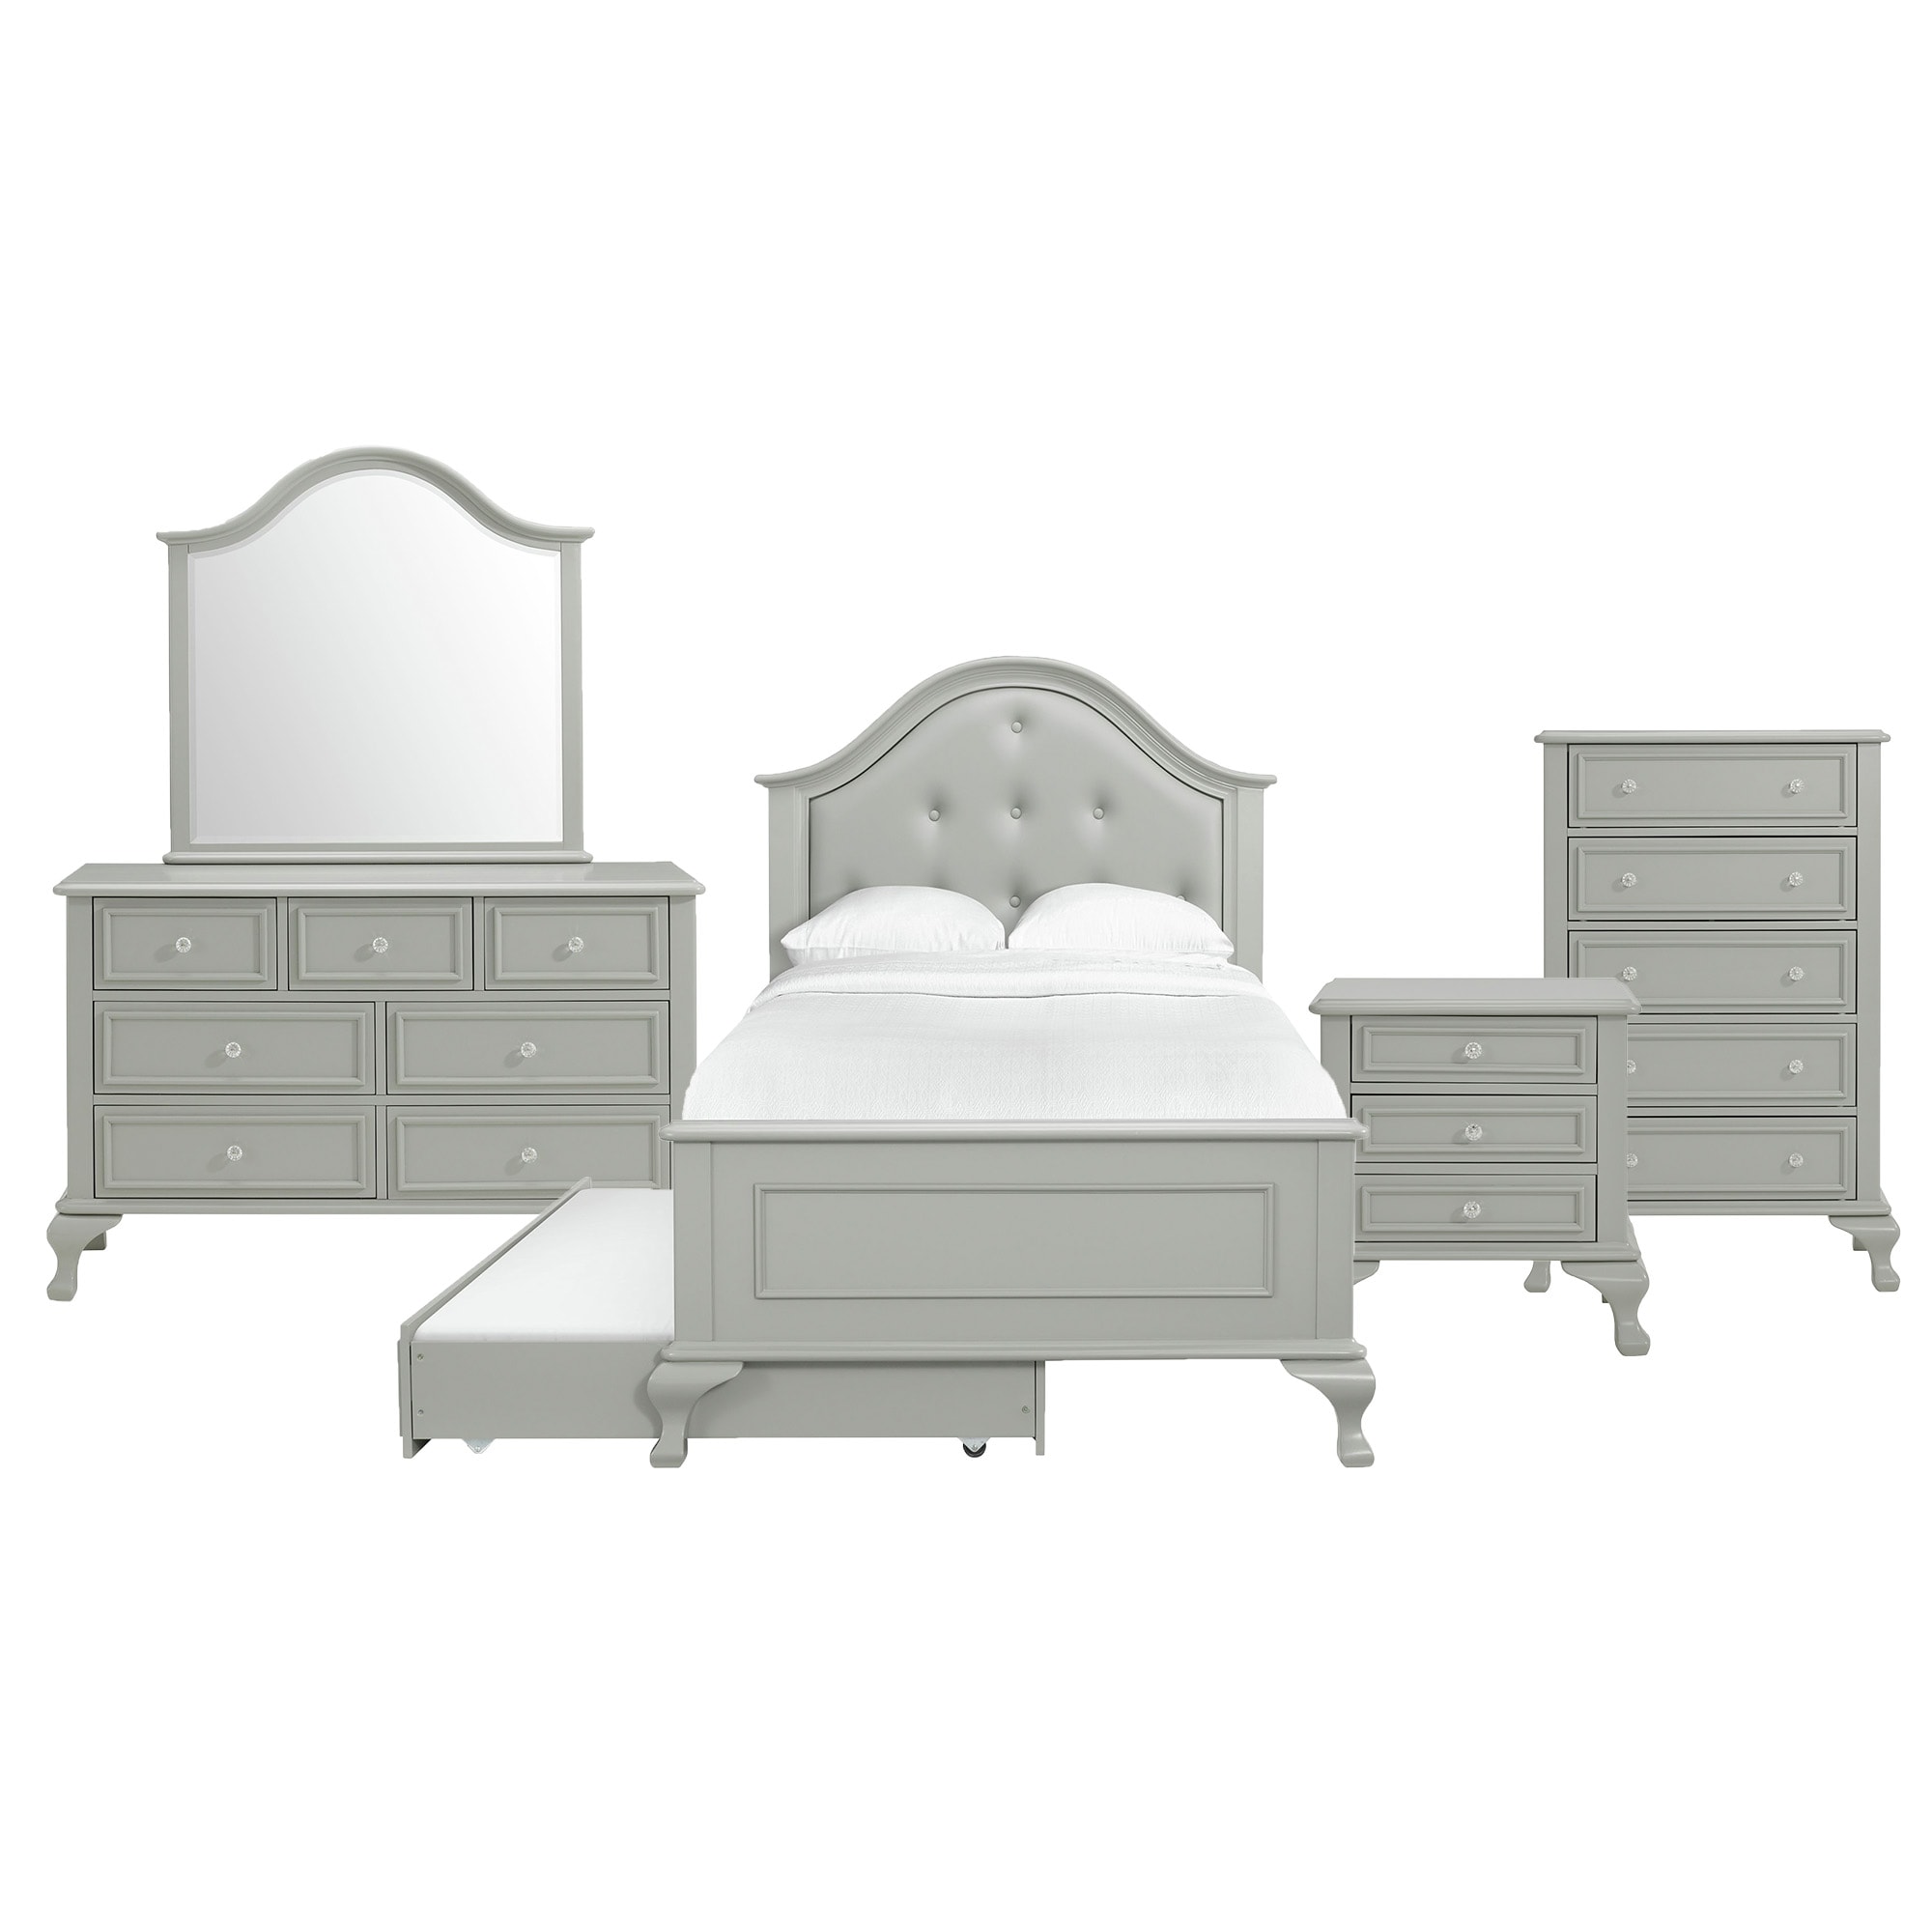 Picket House Furnishings Transitional Grey Twin Panel Bedroom Set with Under-Bed Storage & Trundle | Picket House Jenna 5pc | Chest 32x17x50 | -  JS300TTB5PC